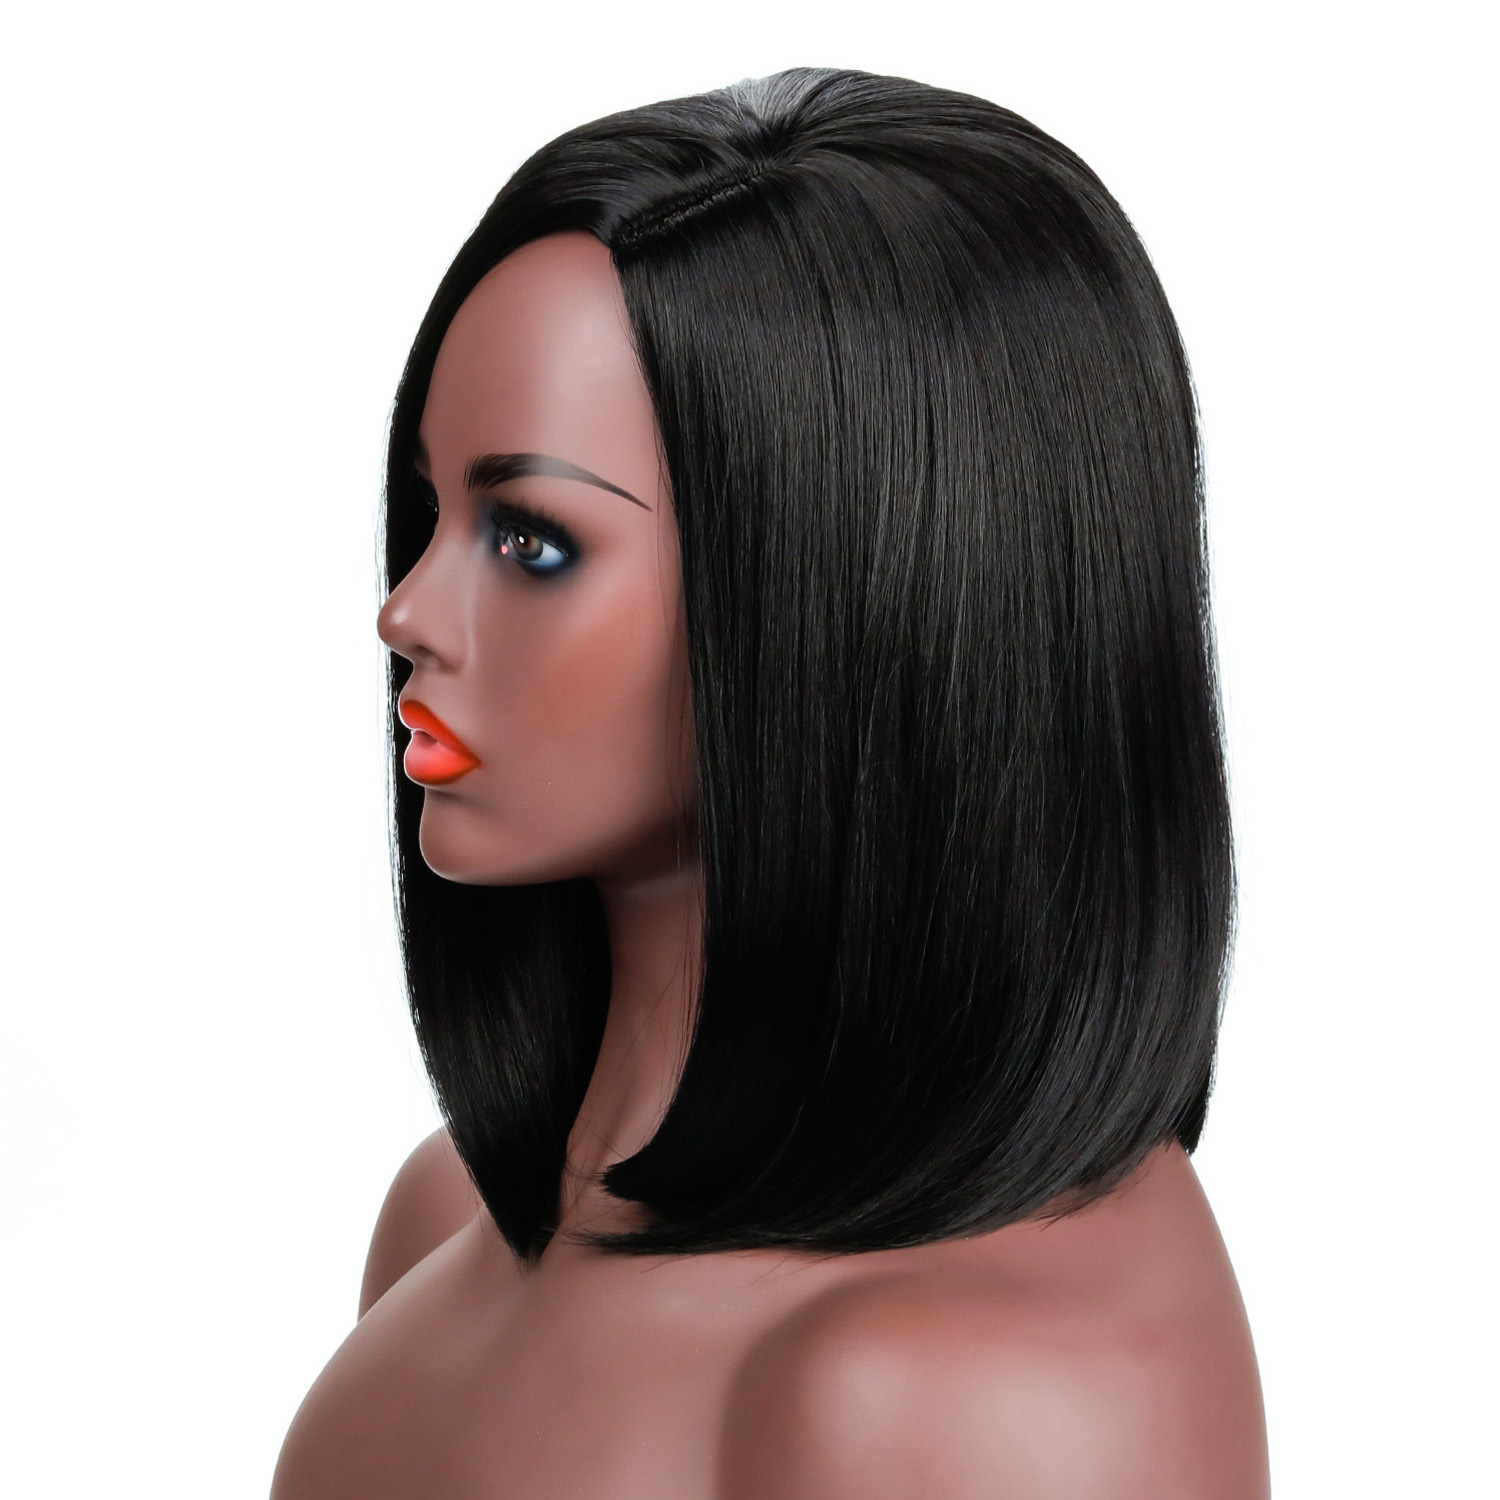 A fashionable synthetic wig designed for women, showcasing black straight hair of medium length